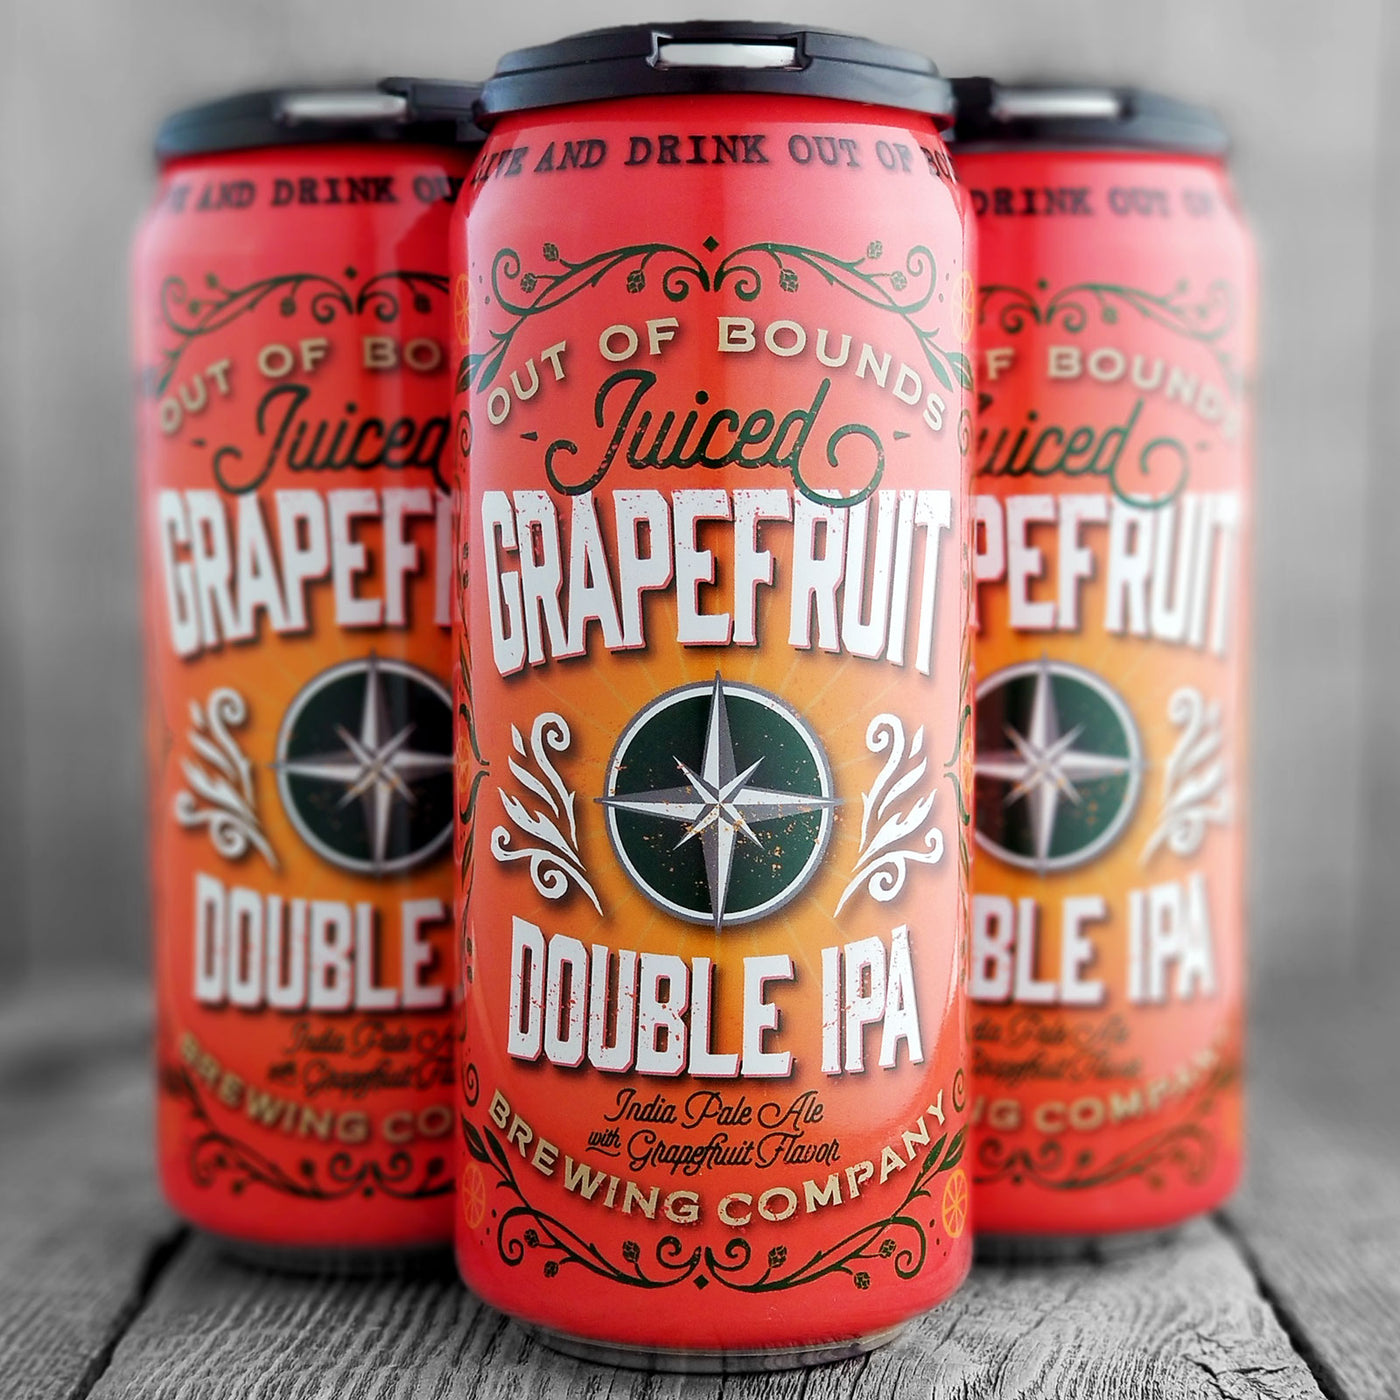 Out Of Bounds Juiced Grapefruit Double IPA